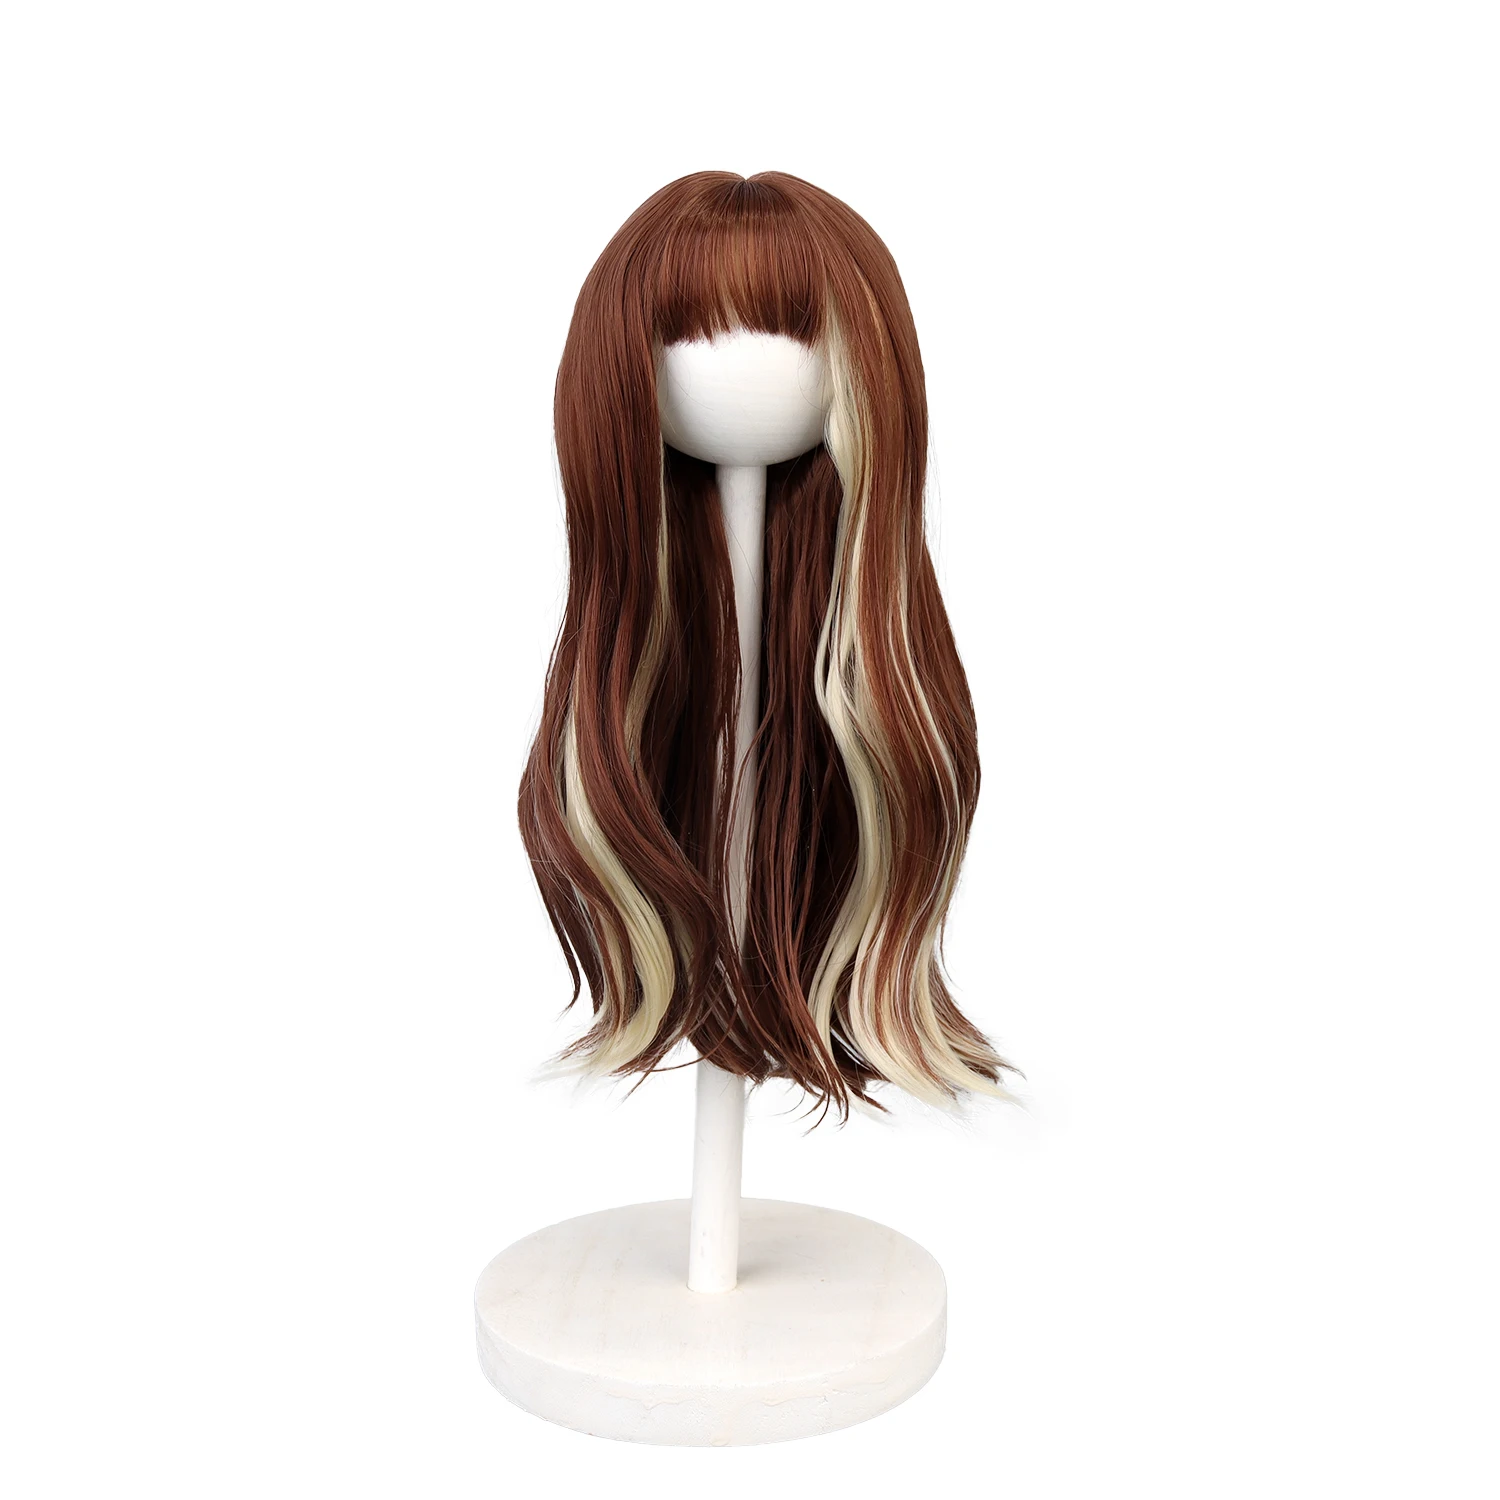 18 Inch American Doll Wigs 27cm Head Circumference Long Wavy Red Brown Blonde Highlight  High Temperature Hair For Doll Girls htd 8m synchronous belt has a circumference of 1512mm 1720mmmm width of 15 20 25 30 40 50mm high torque rubber synchronous belt